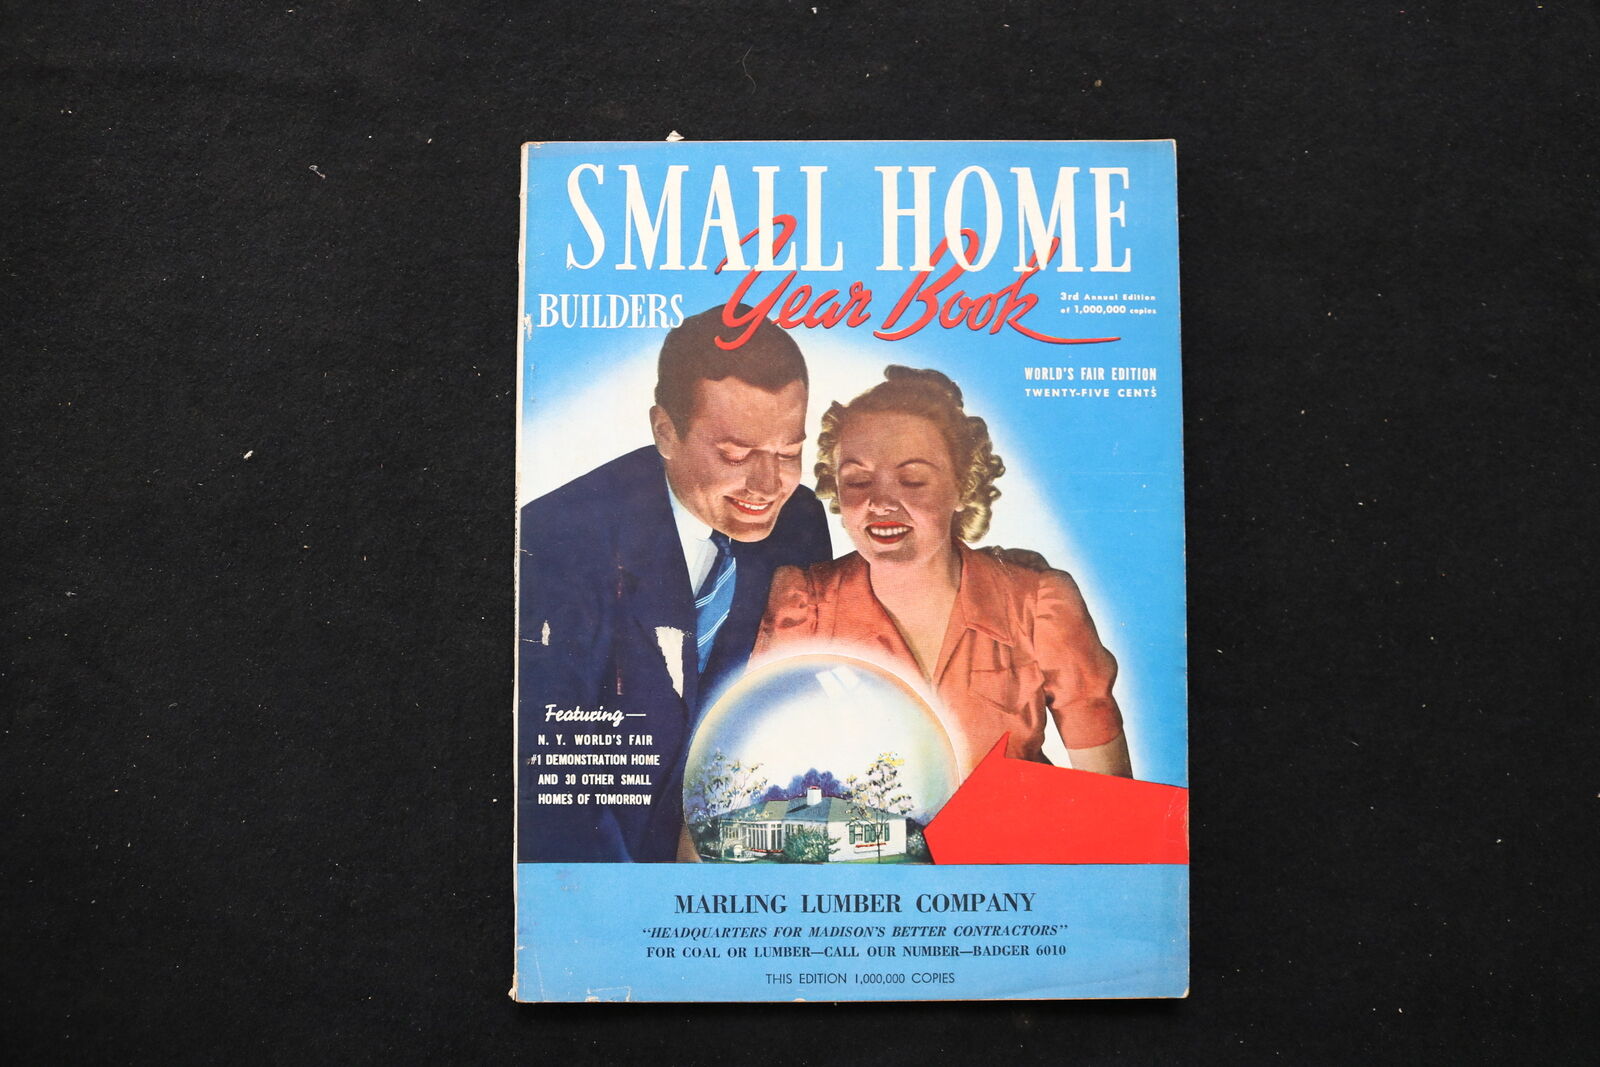 1939 SMALL HOME BUIDLERS MAGAZINE - WORLD\'S FAIR EDITION COVER - E 10421